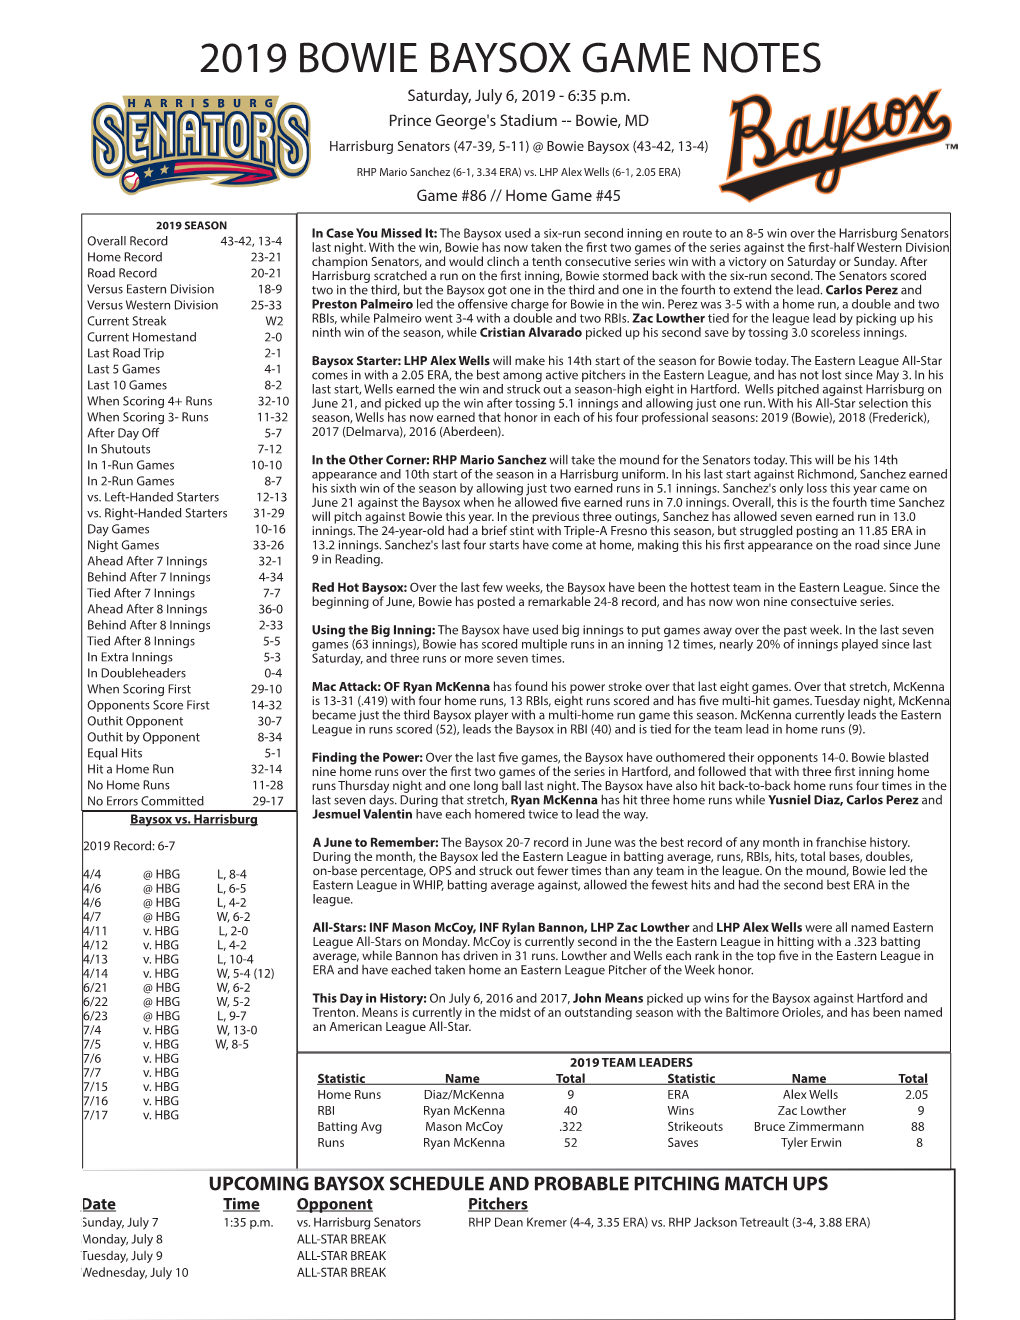 2019 BOWIE BAYSOX GAME NOTES Saturday, July 6, 2019 - 6:35 P.M